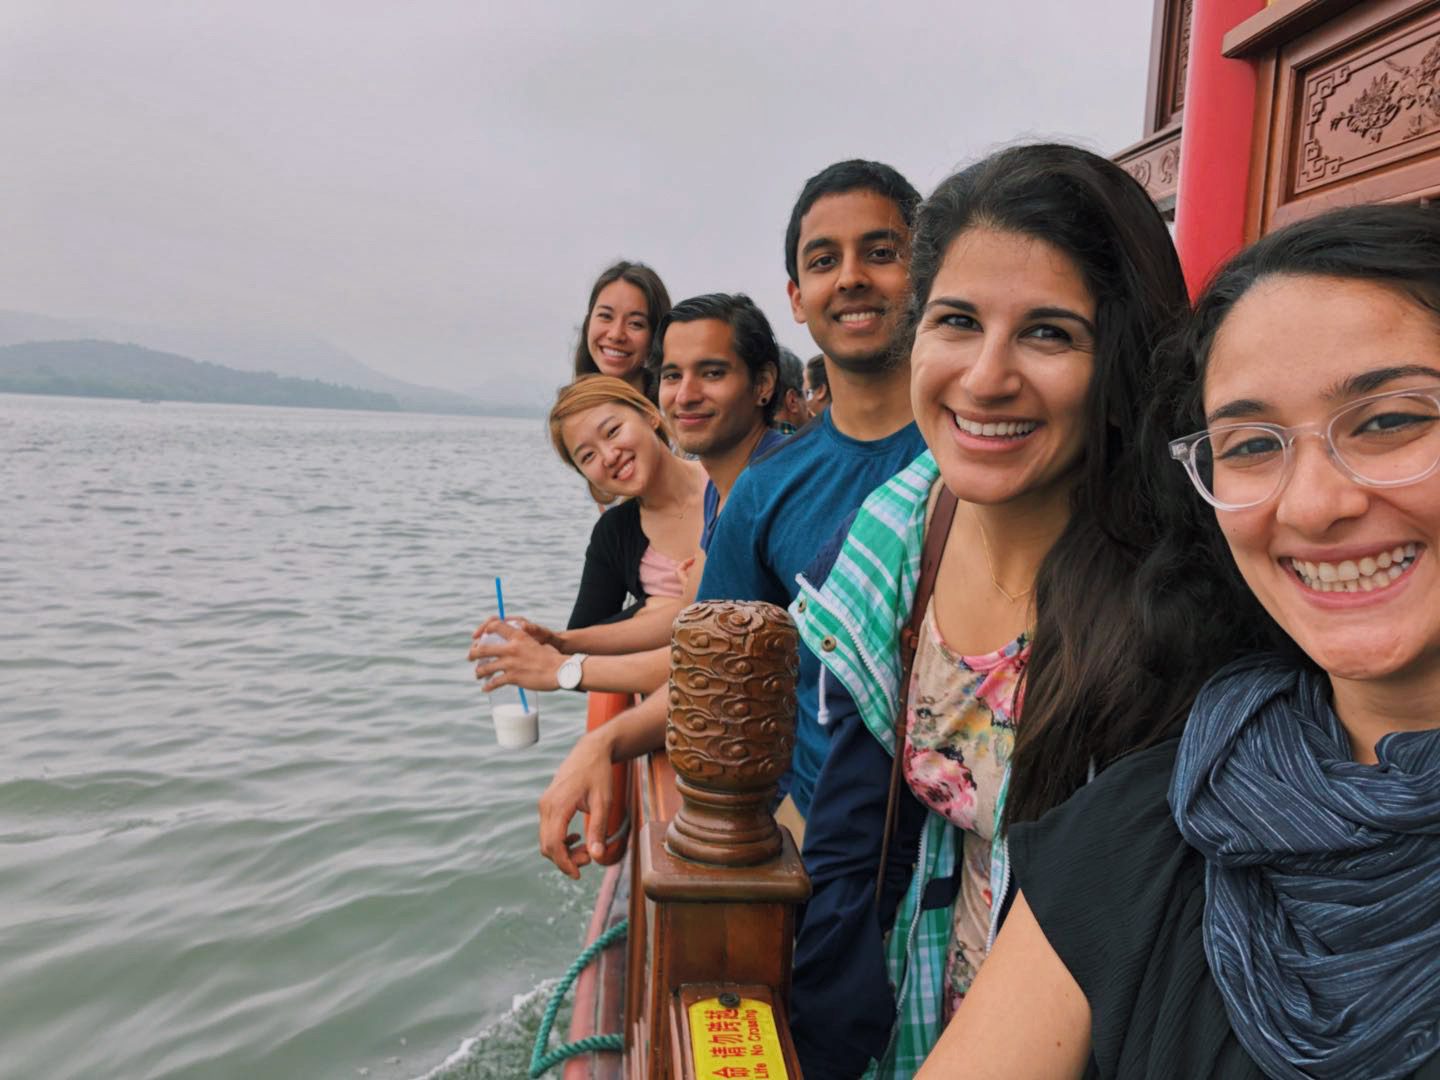 The Seedlink and 51Jobs teams take a boat cruise in Hangzhou, China.